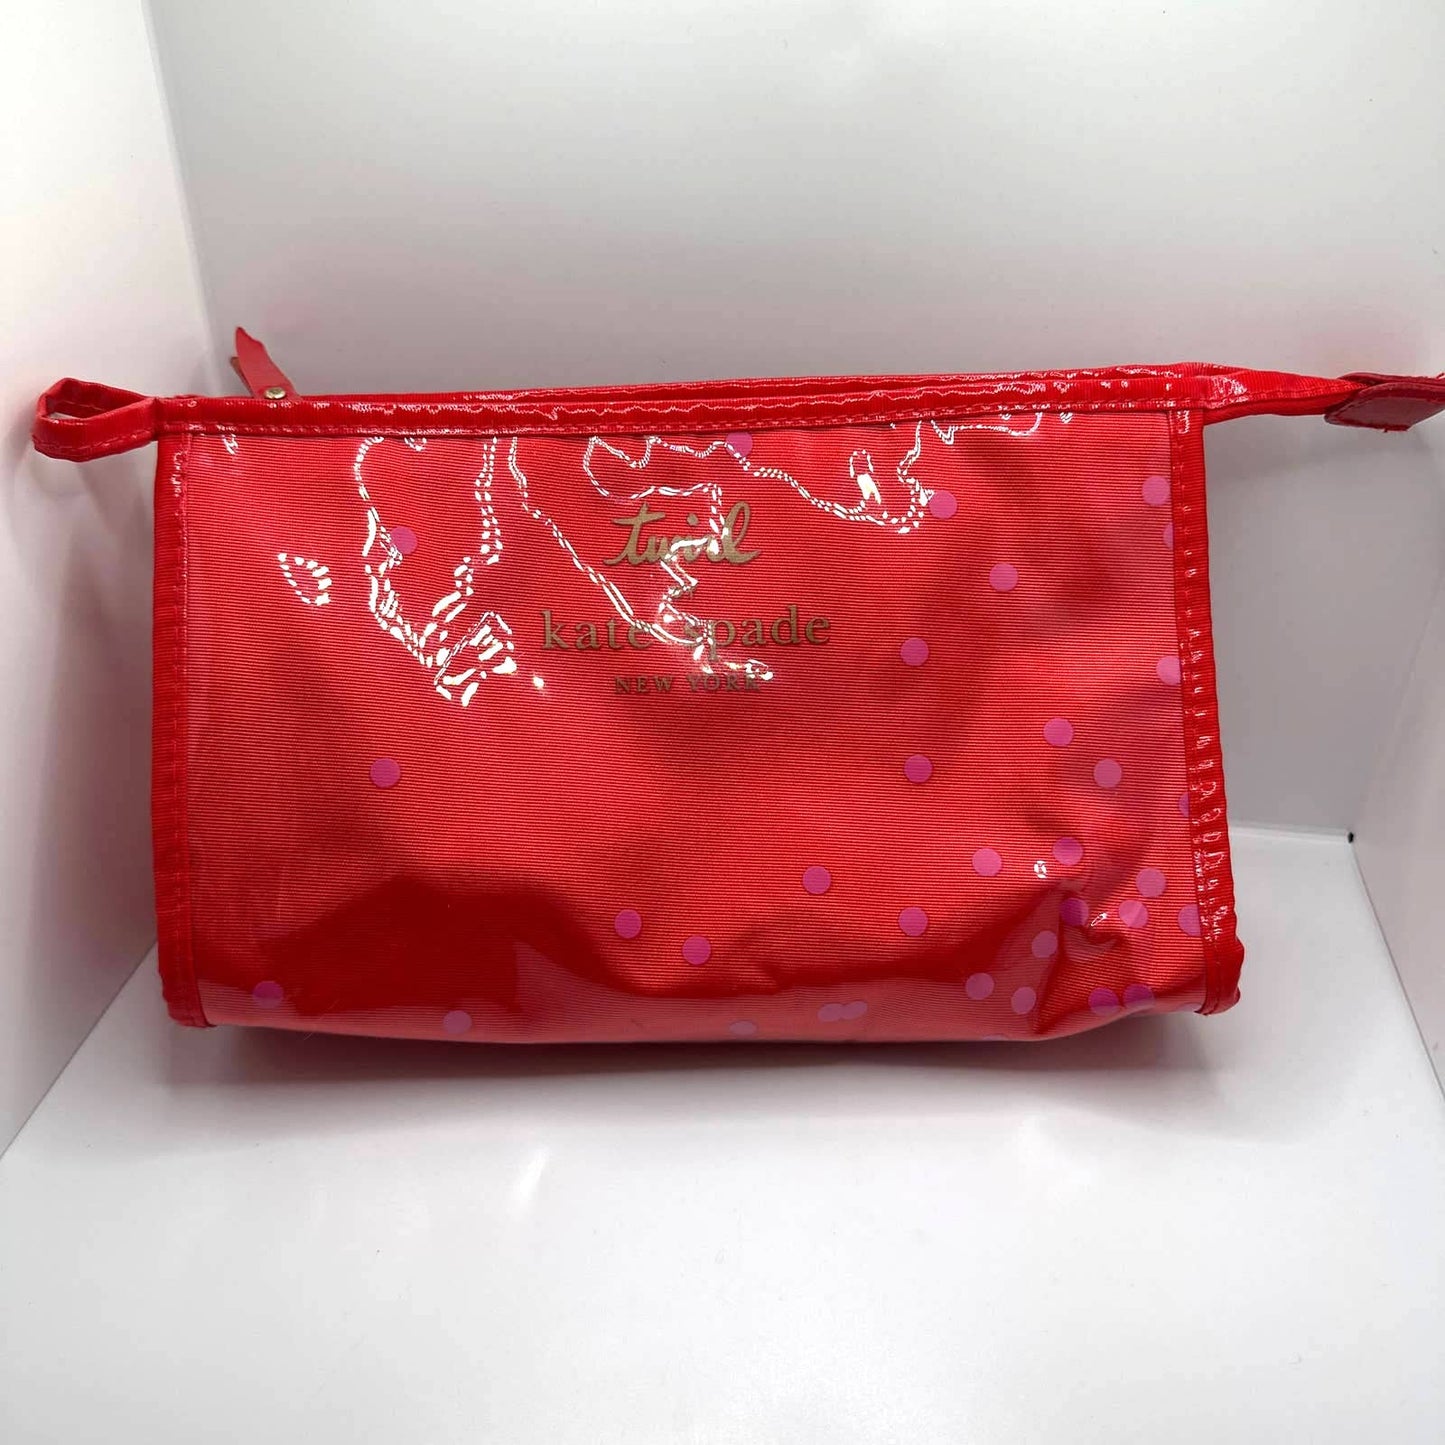 TWIRL by KATE SPADE New York Cosmetic Case / Perfume Make up Bag